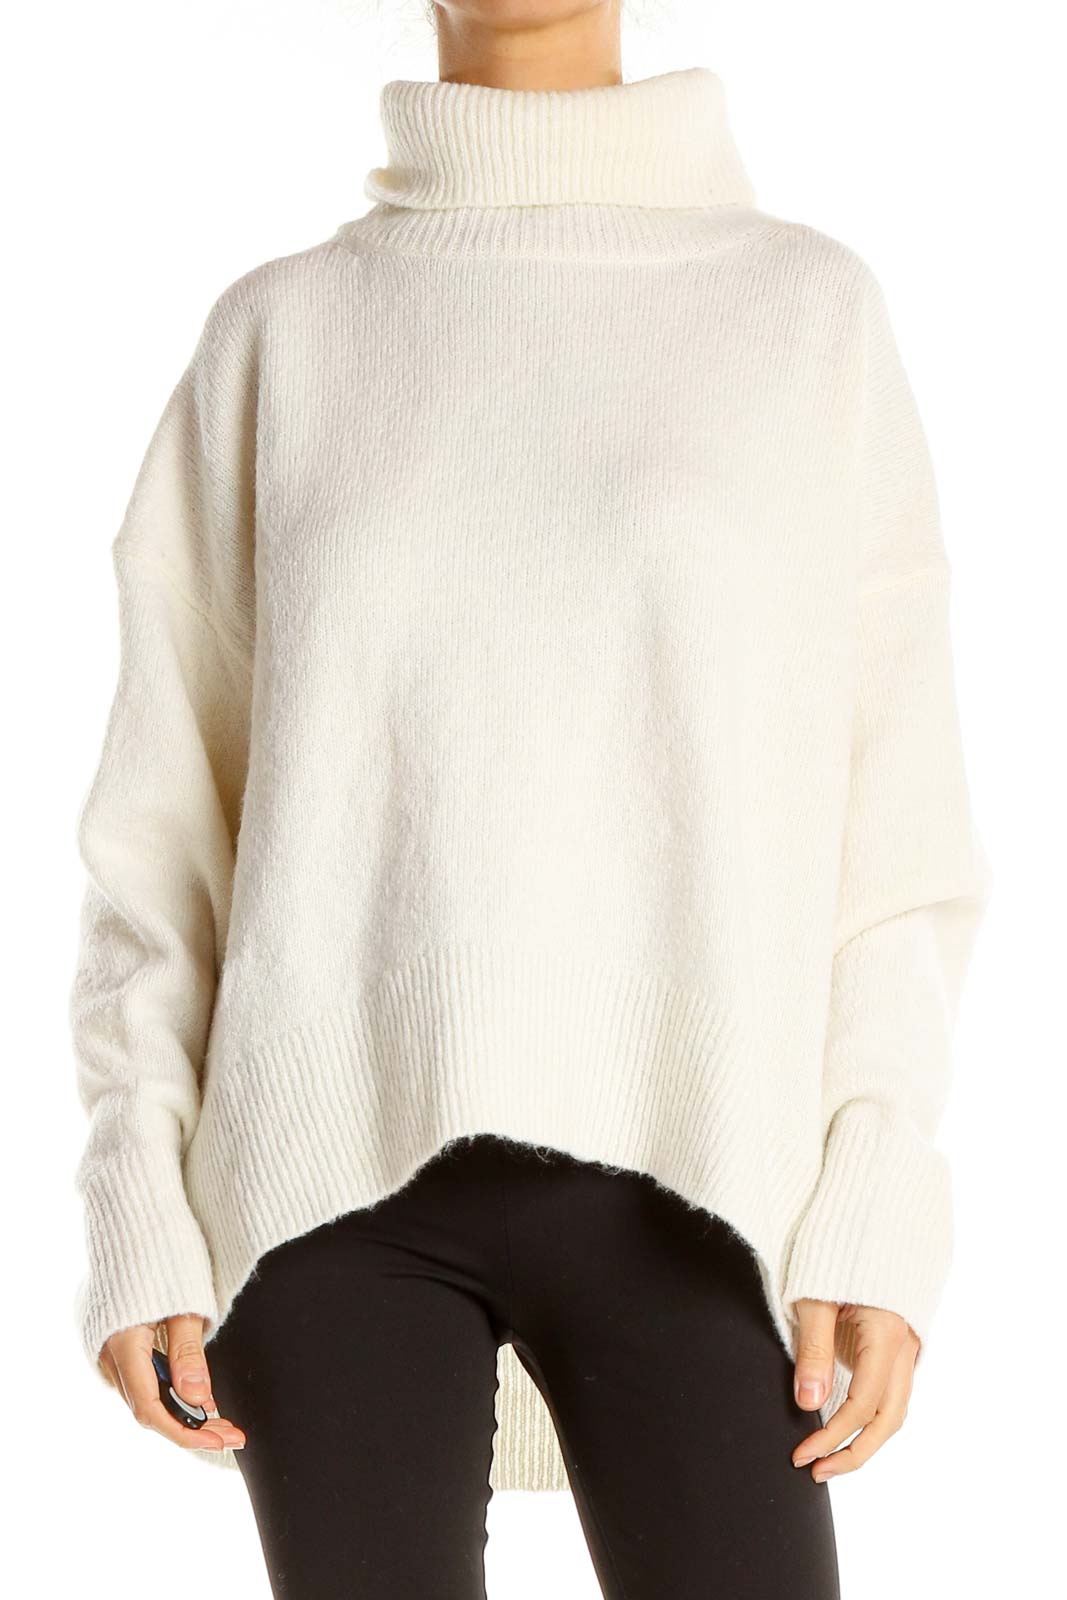 White Chic Sweater Front